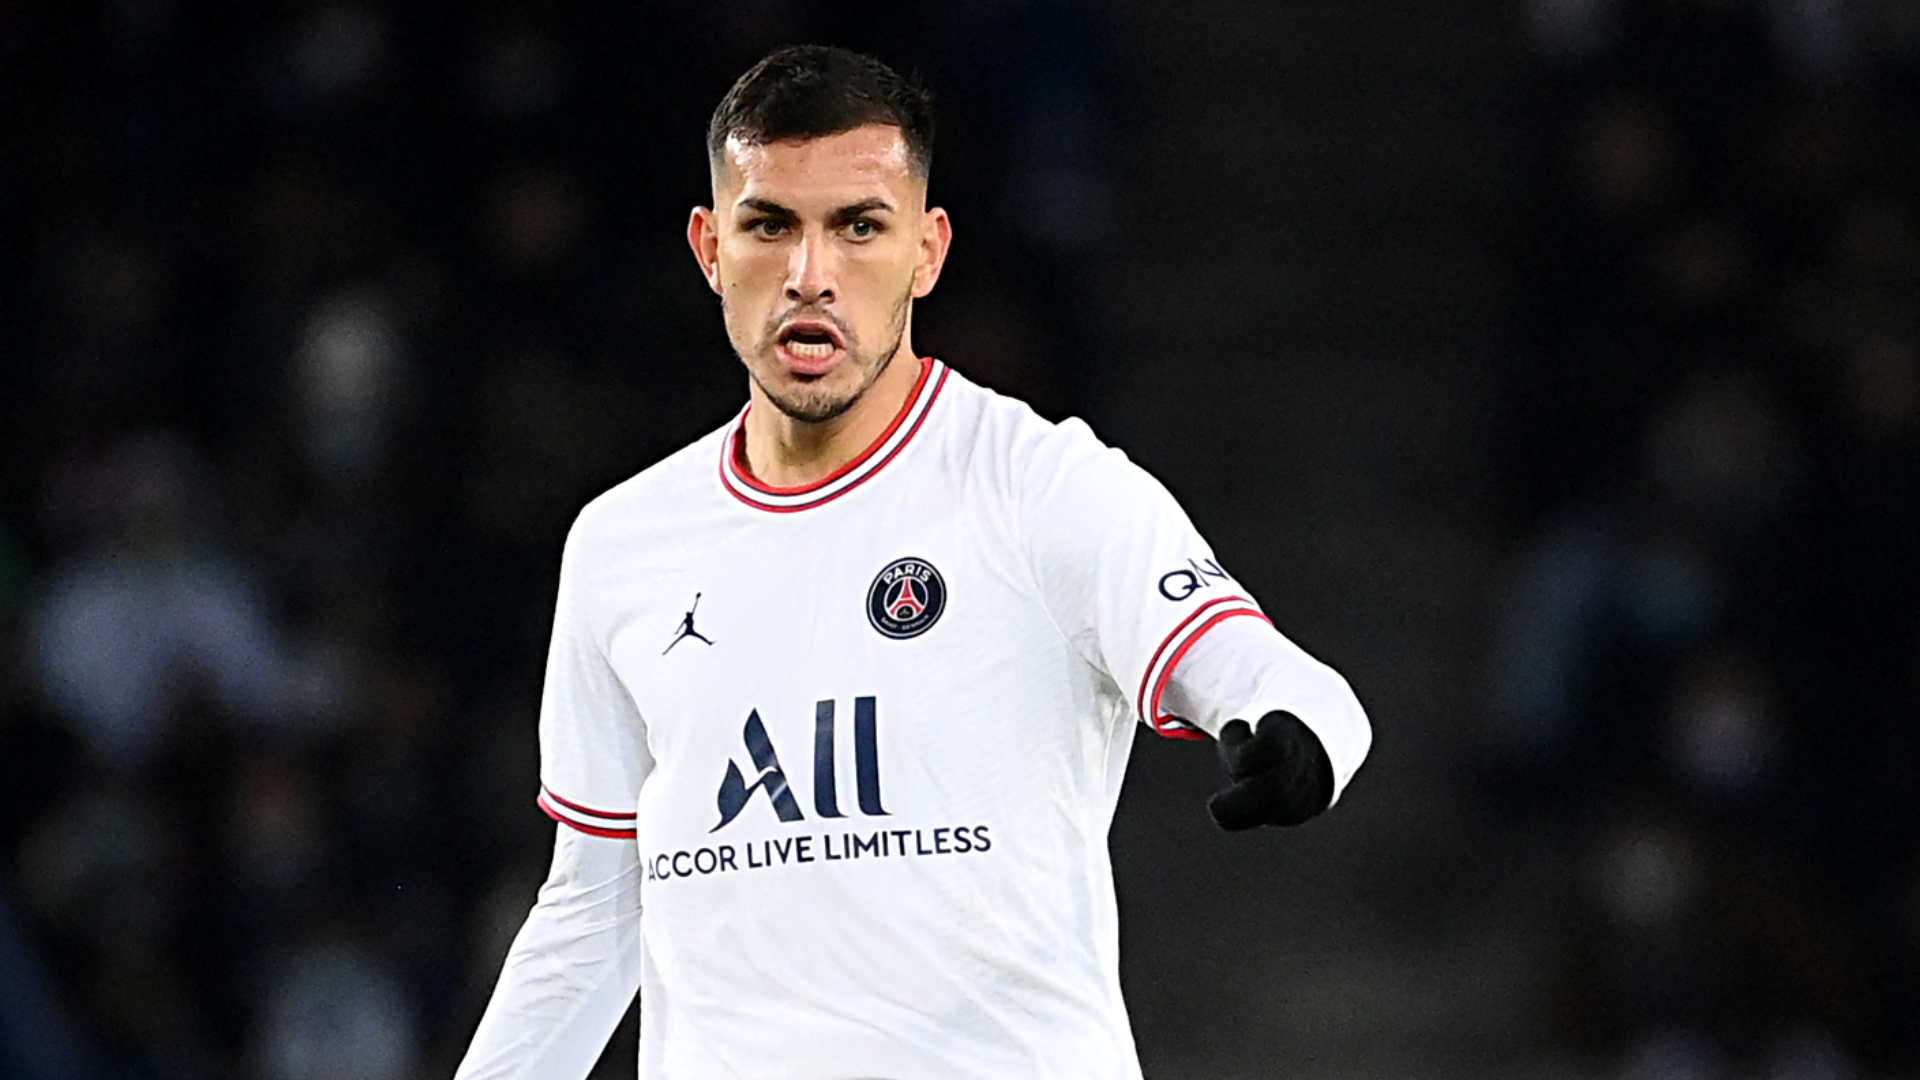 PSG midfielder Paredes dreaming of Real Madrid move | Goal.com